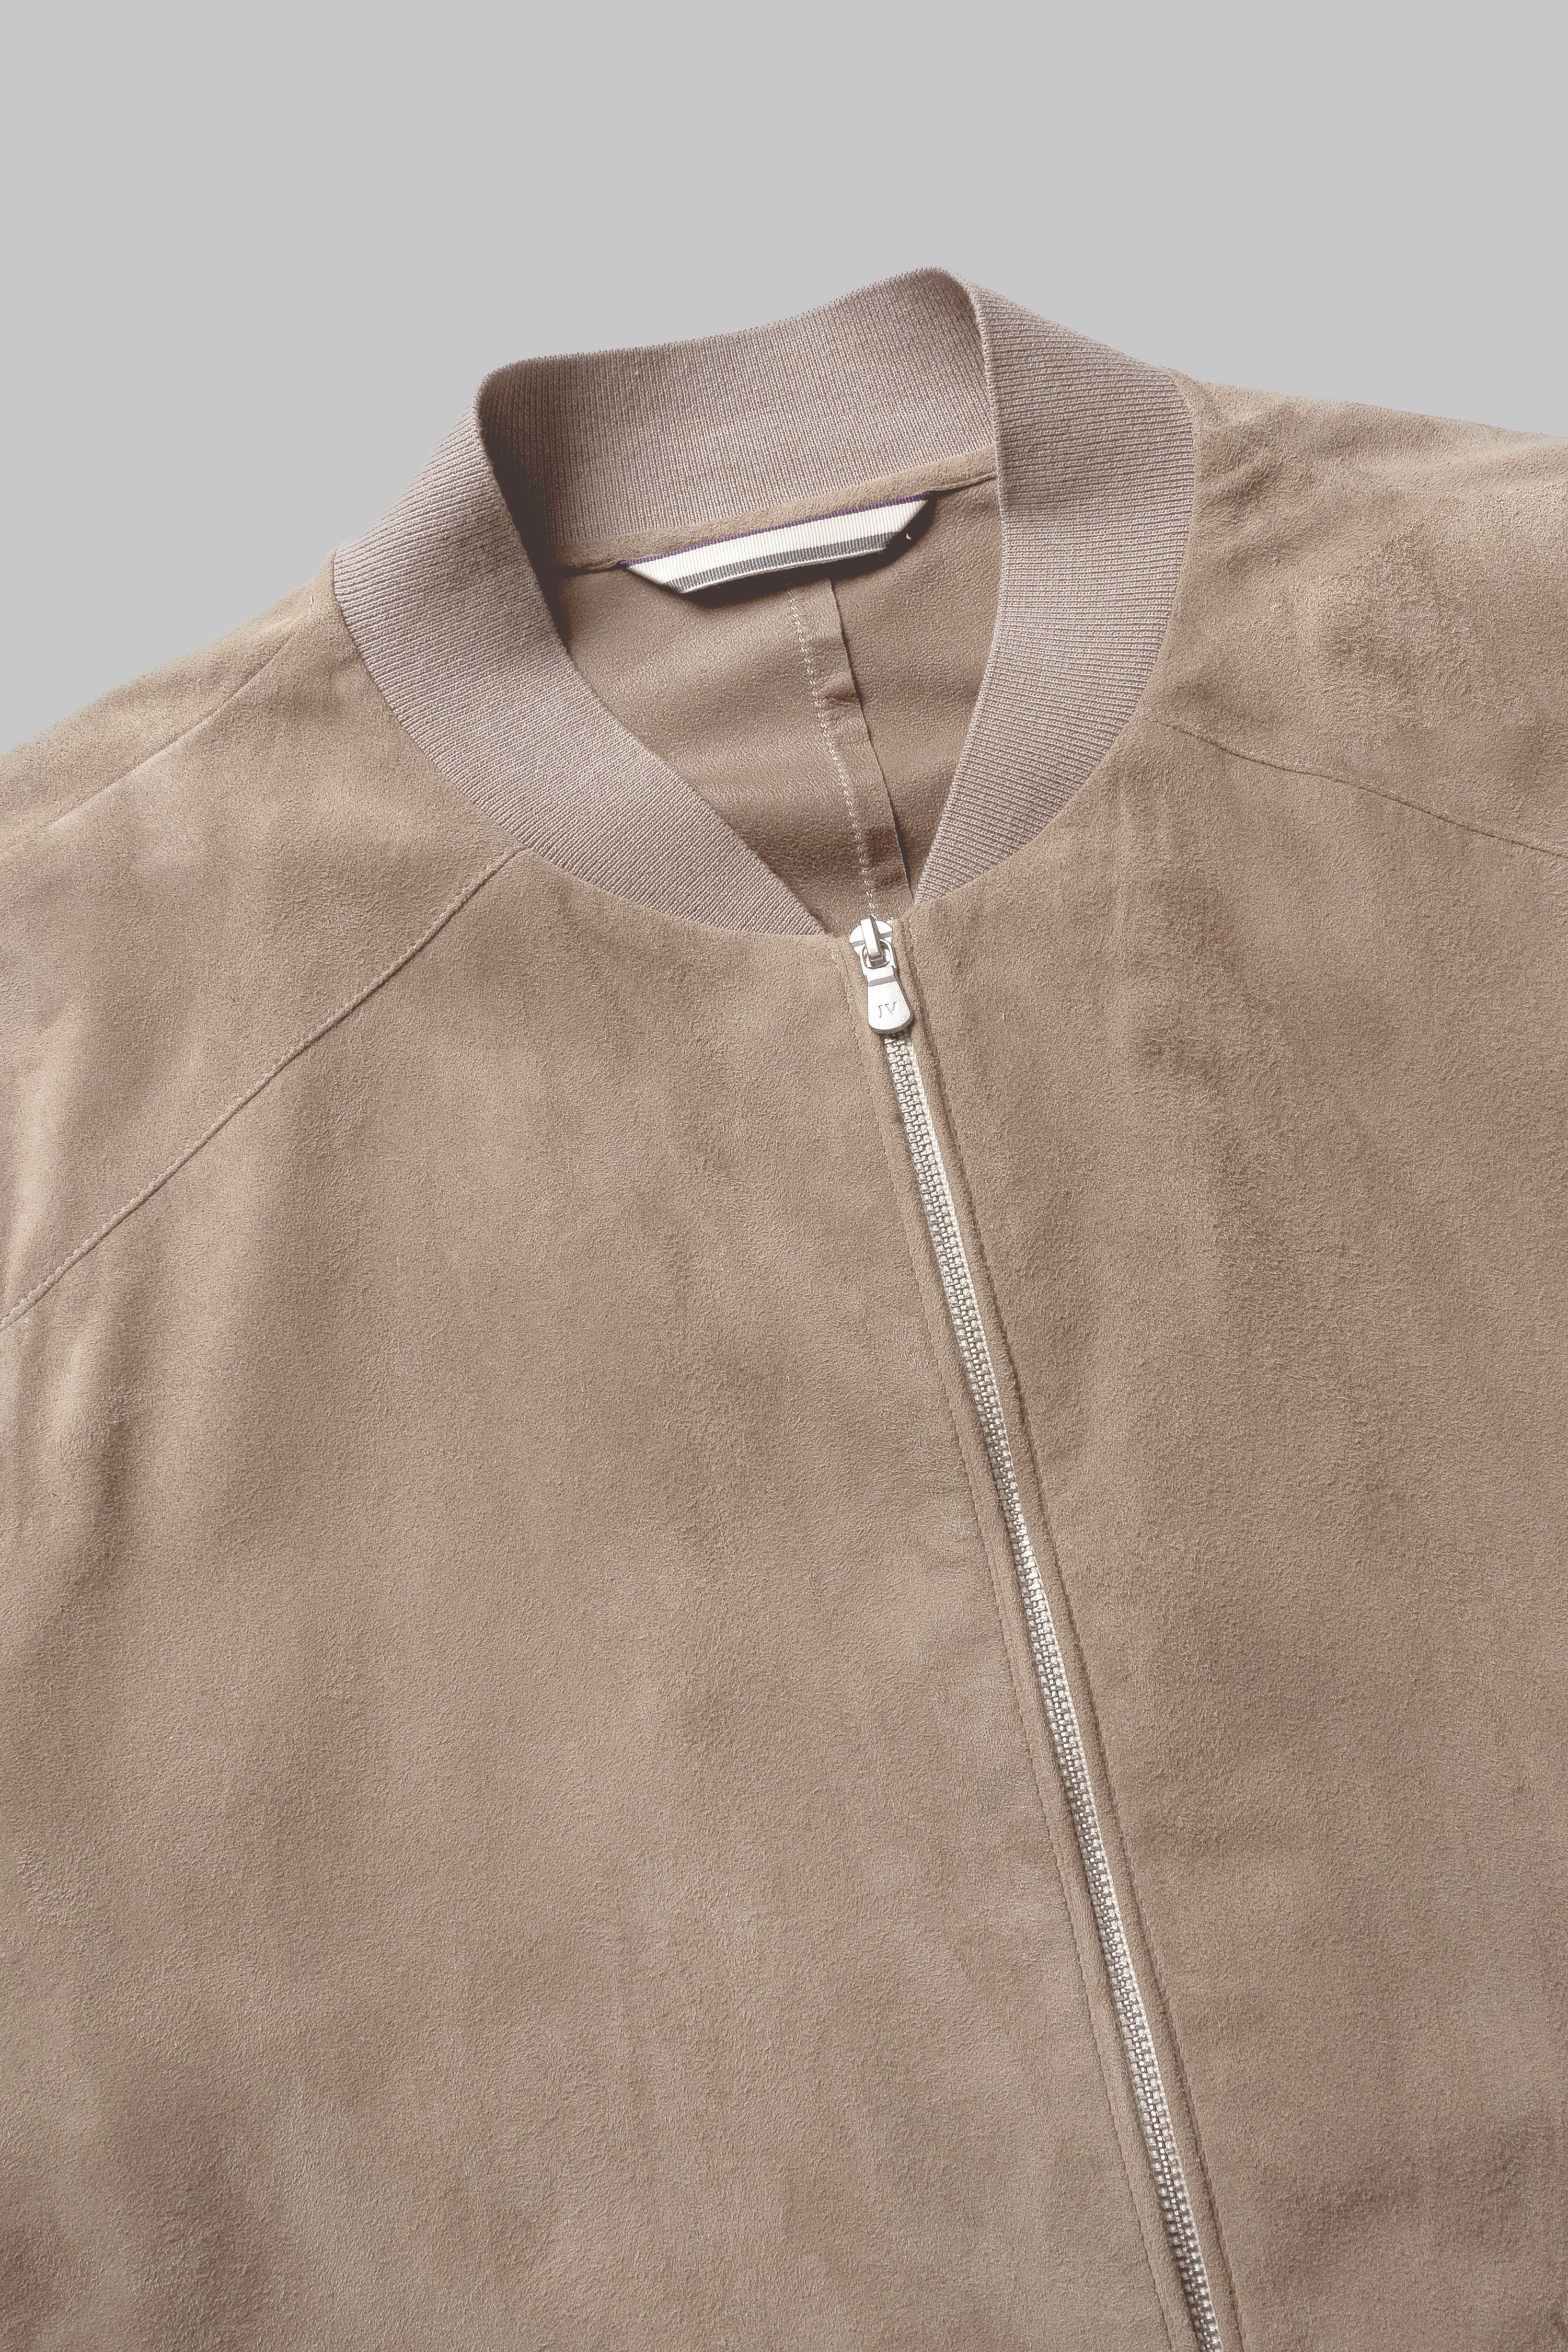 Alt view 3 Barclay Suede Bomber Jacket in Tan